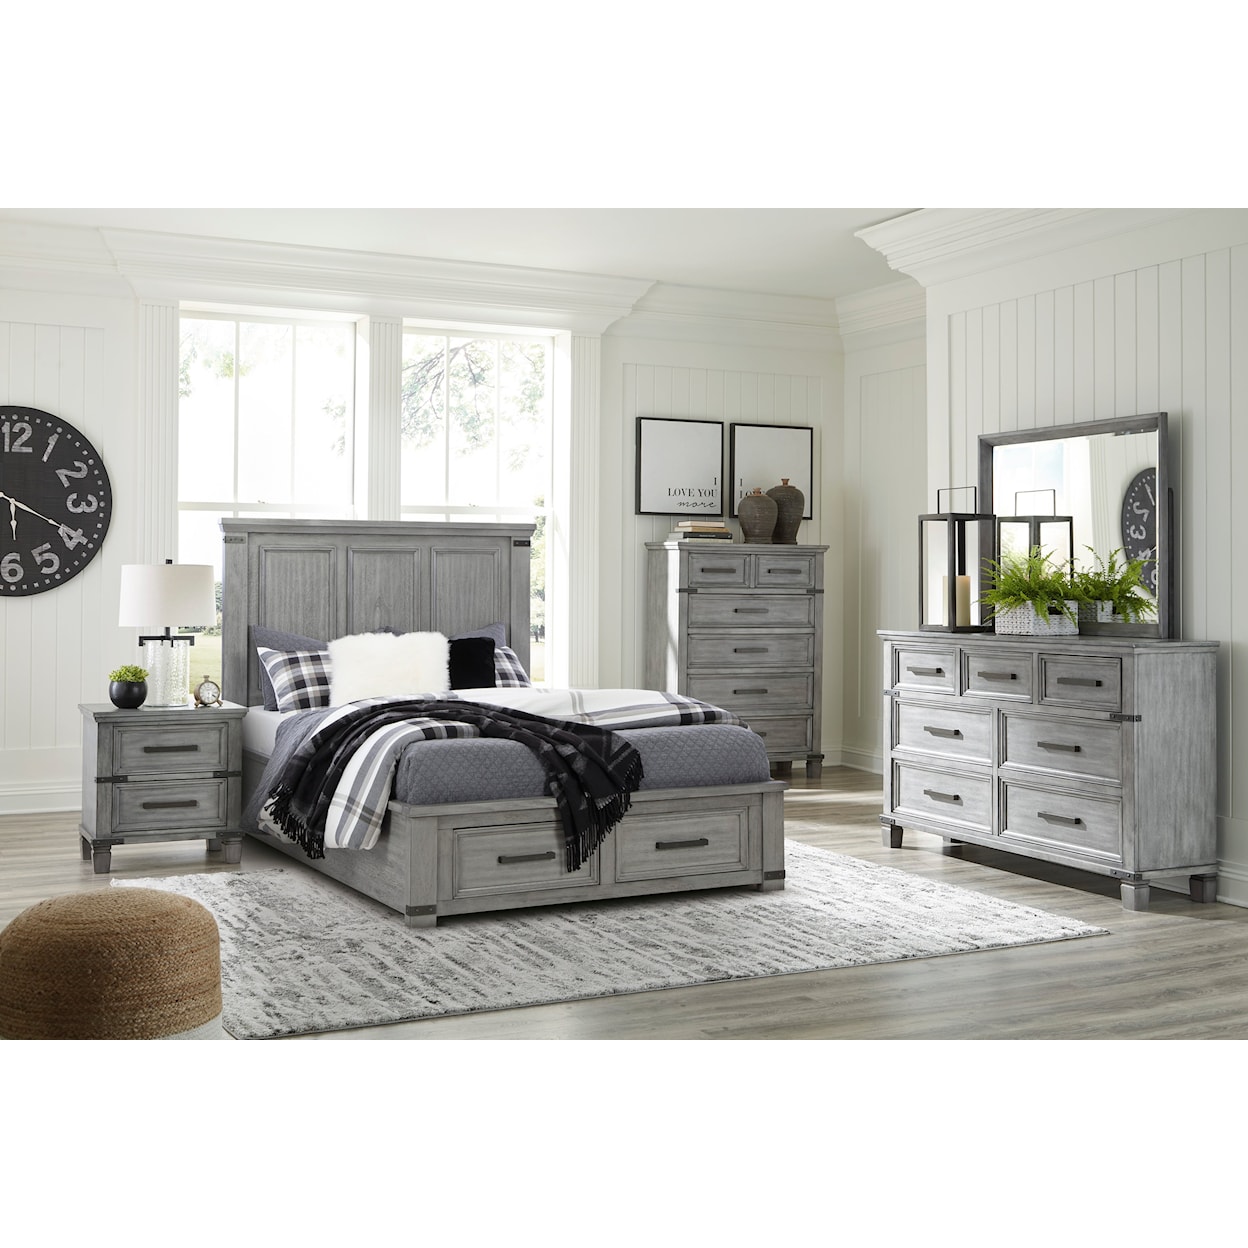 Signature Design by Ashley Russelyn 6 Piece Queen Bedroom Set